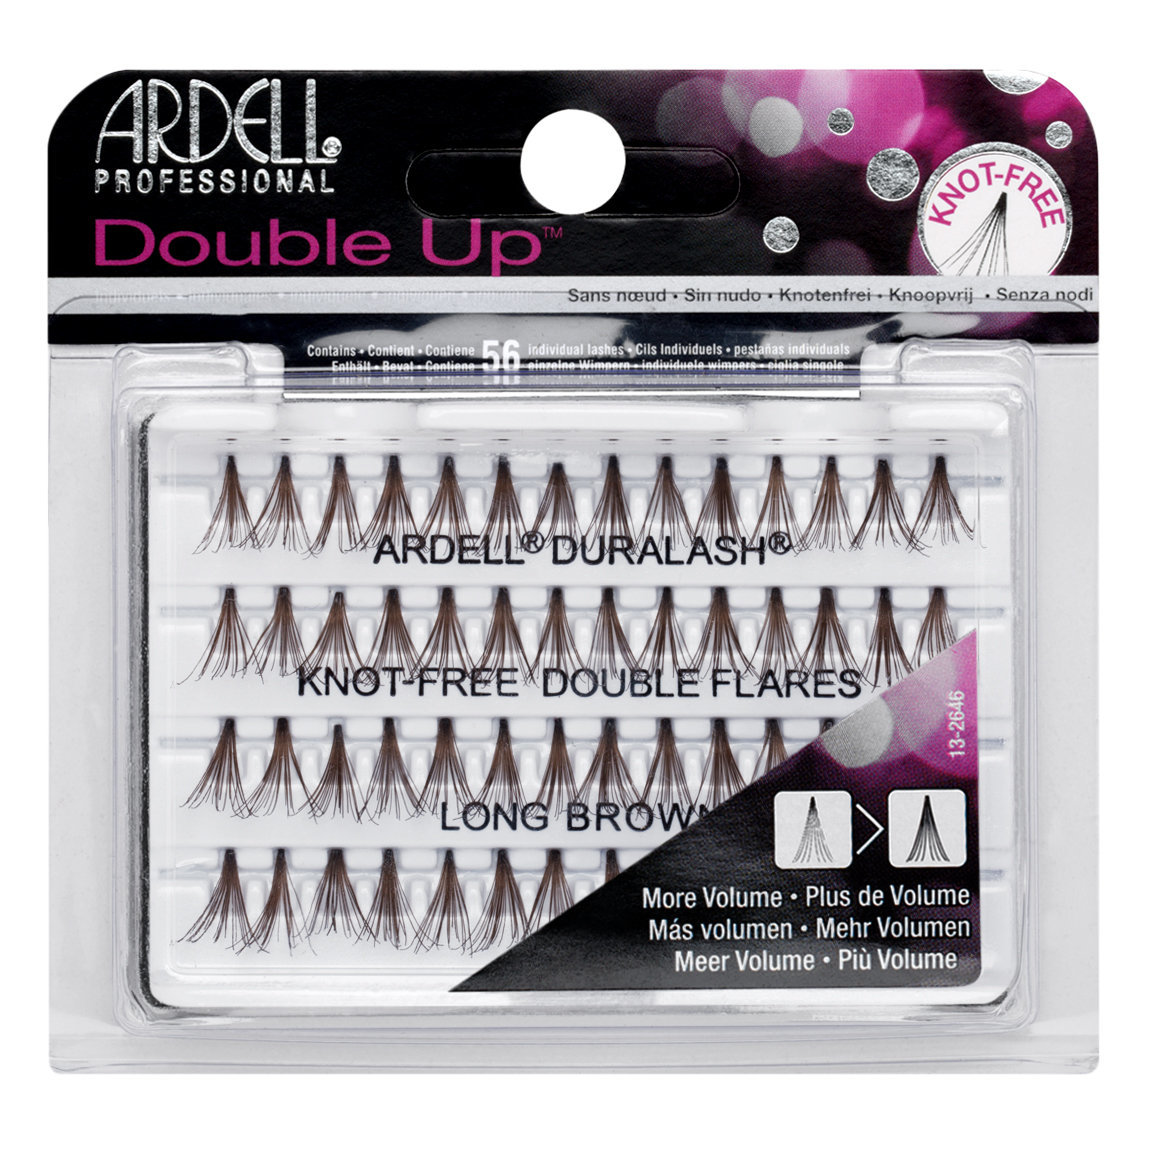 Ardell Double Up Individuals Knot-Free Lashes Long Brown alternative view 1.